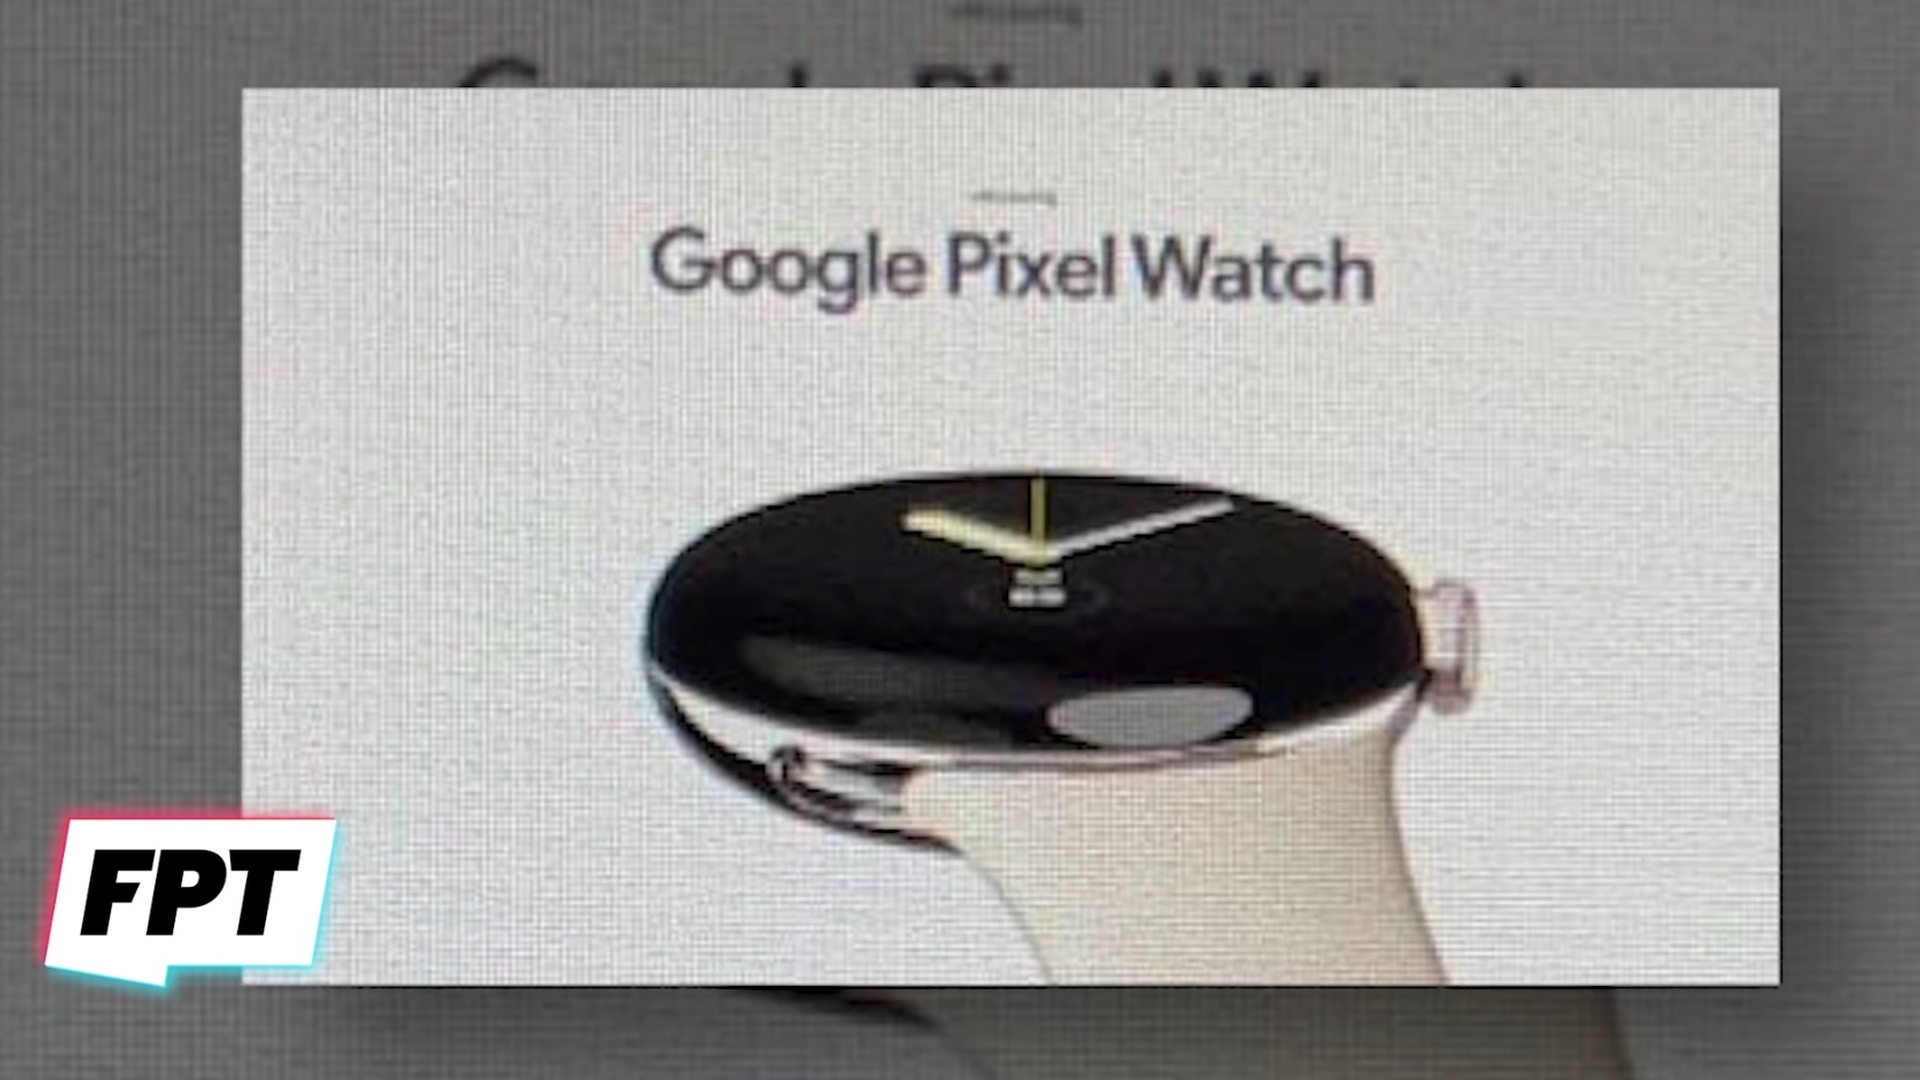 A marketing image of the Google Pixel Watch Prosser showing the watch face and strap 